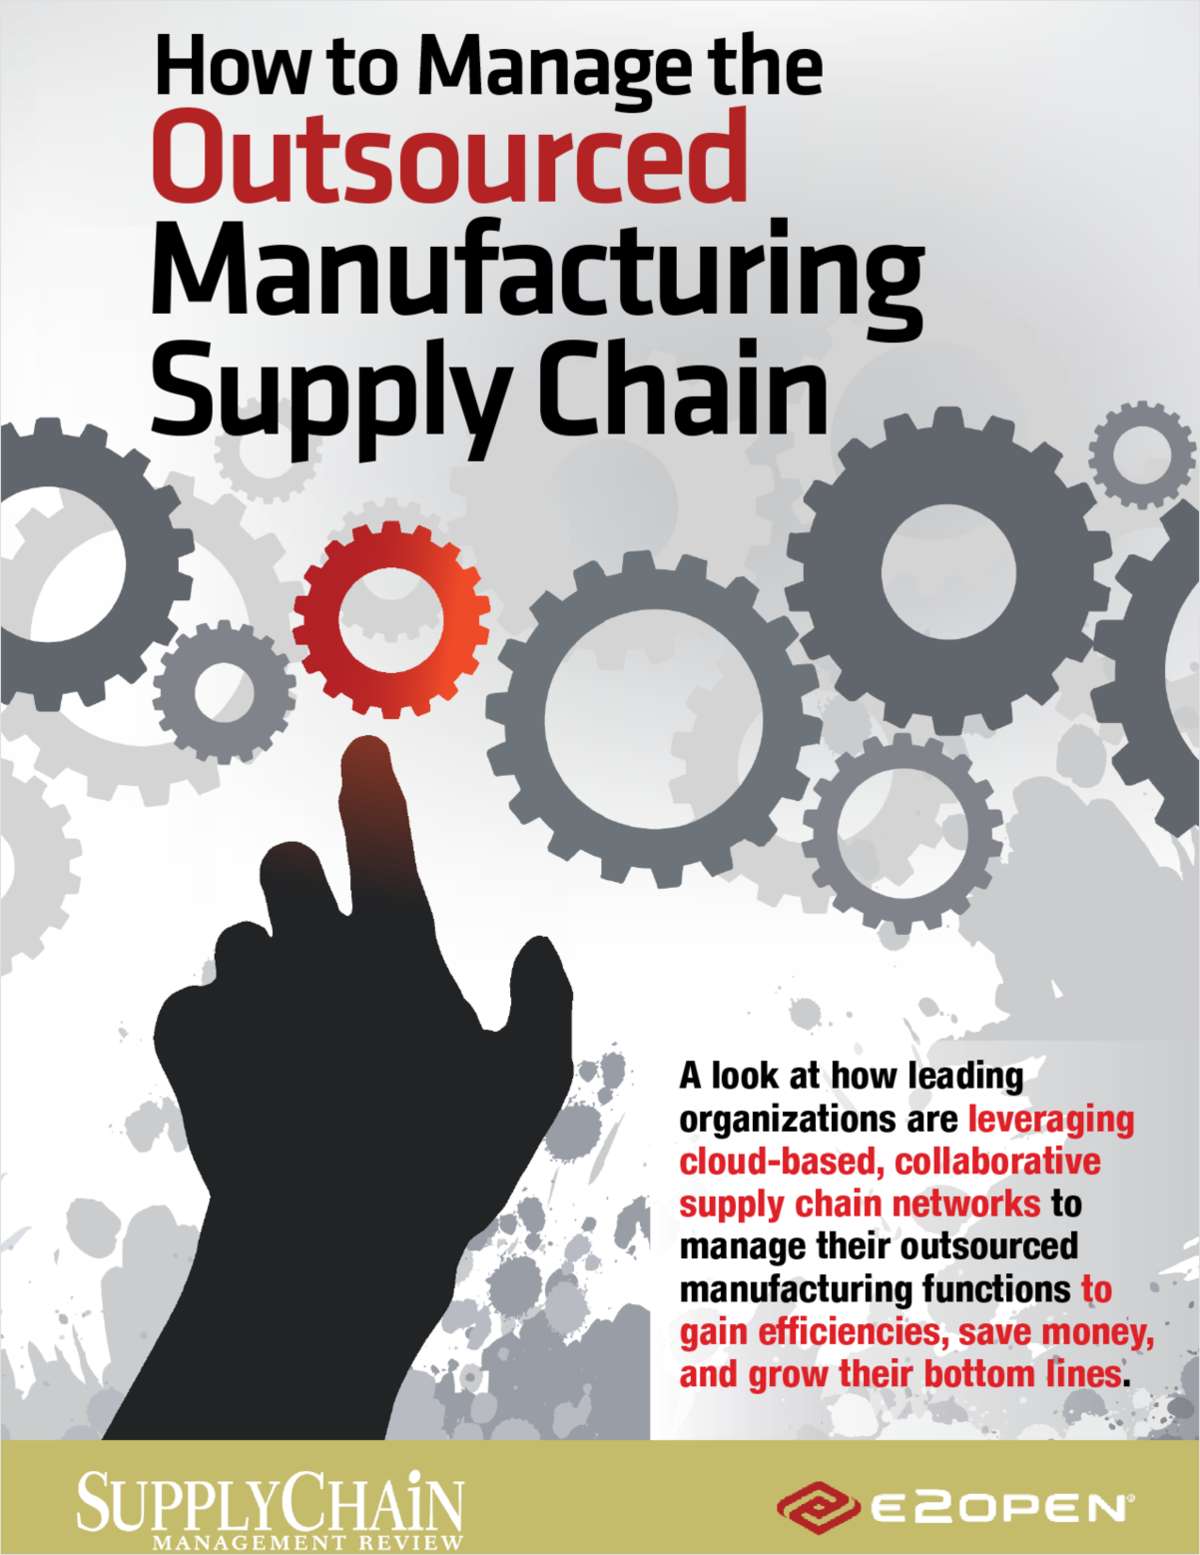 How to Manage the Outsourced Manufacturing Supply Chain